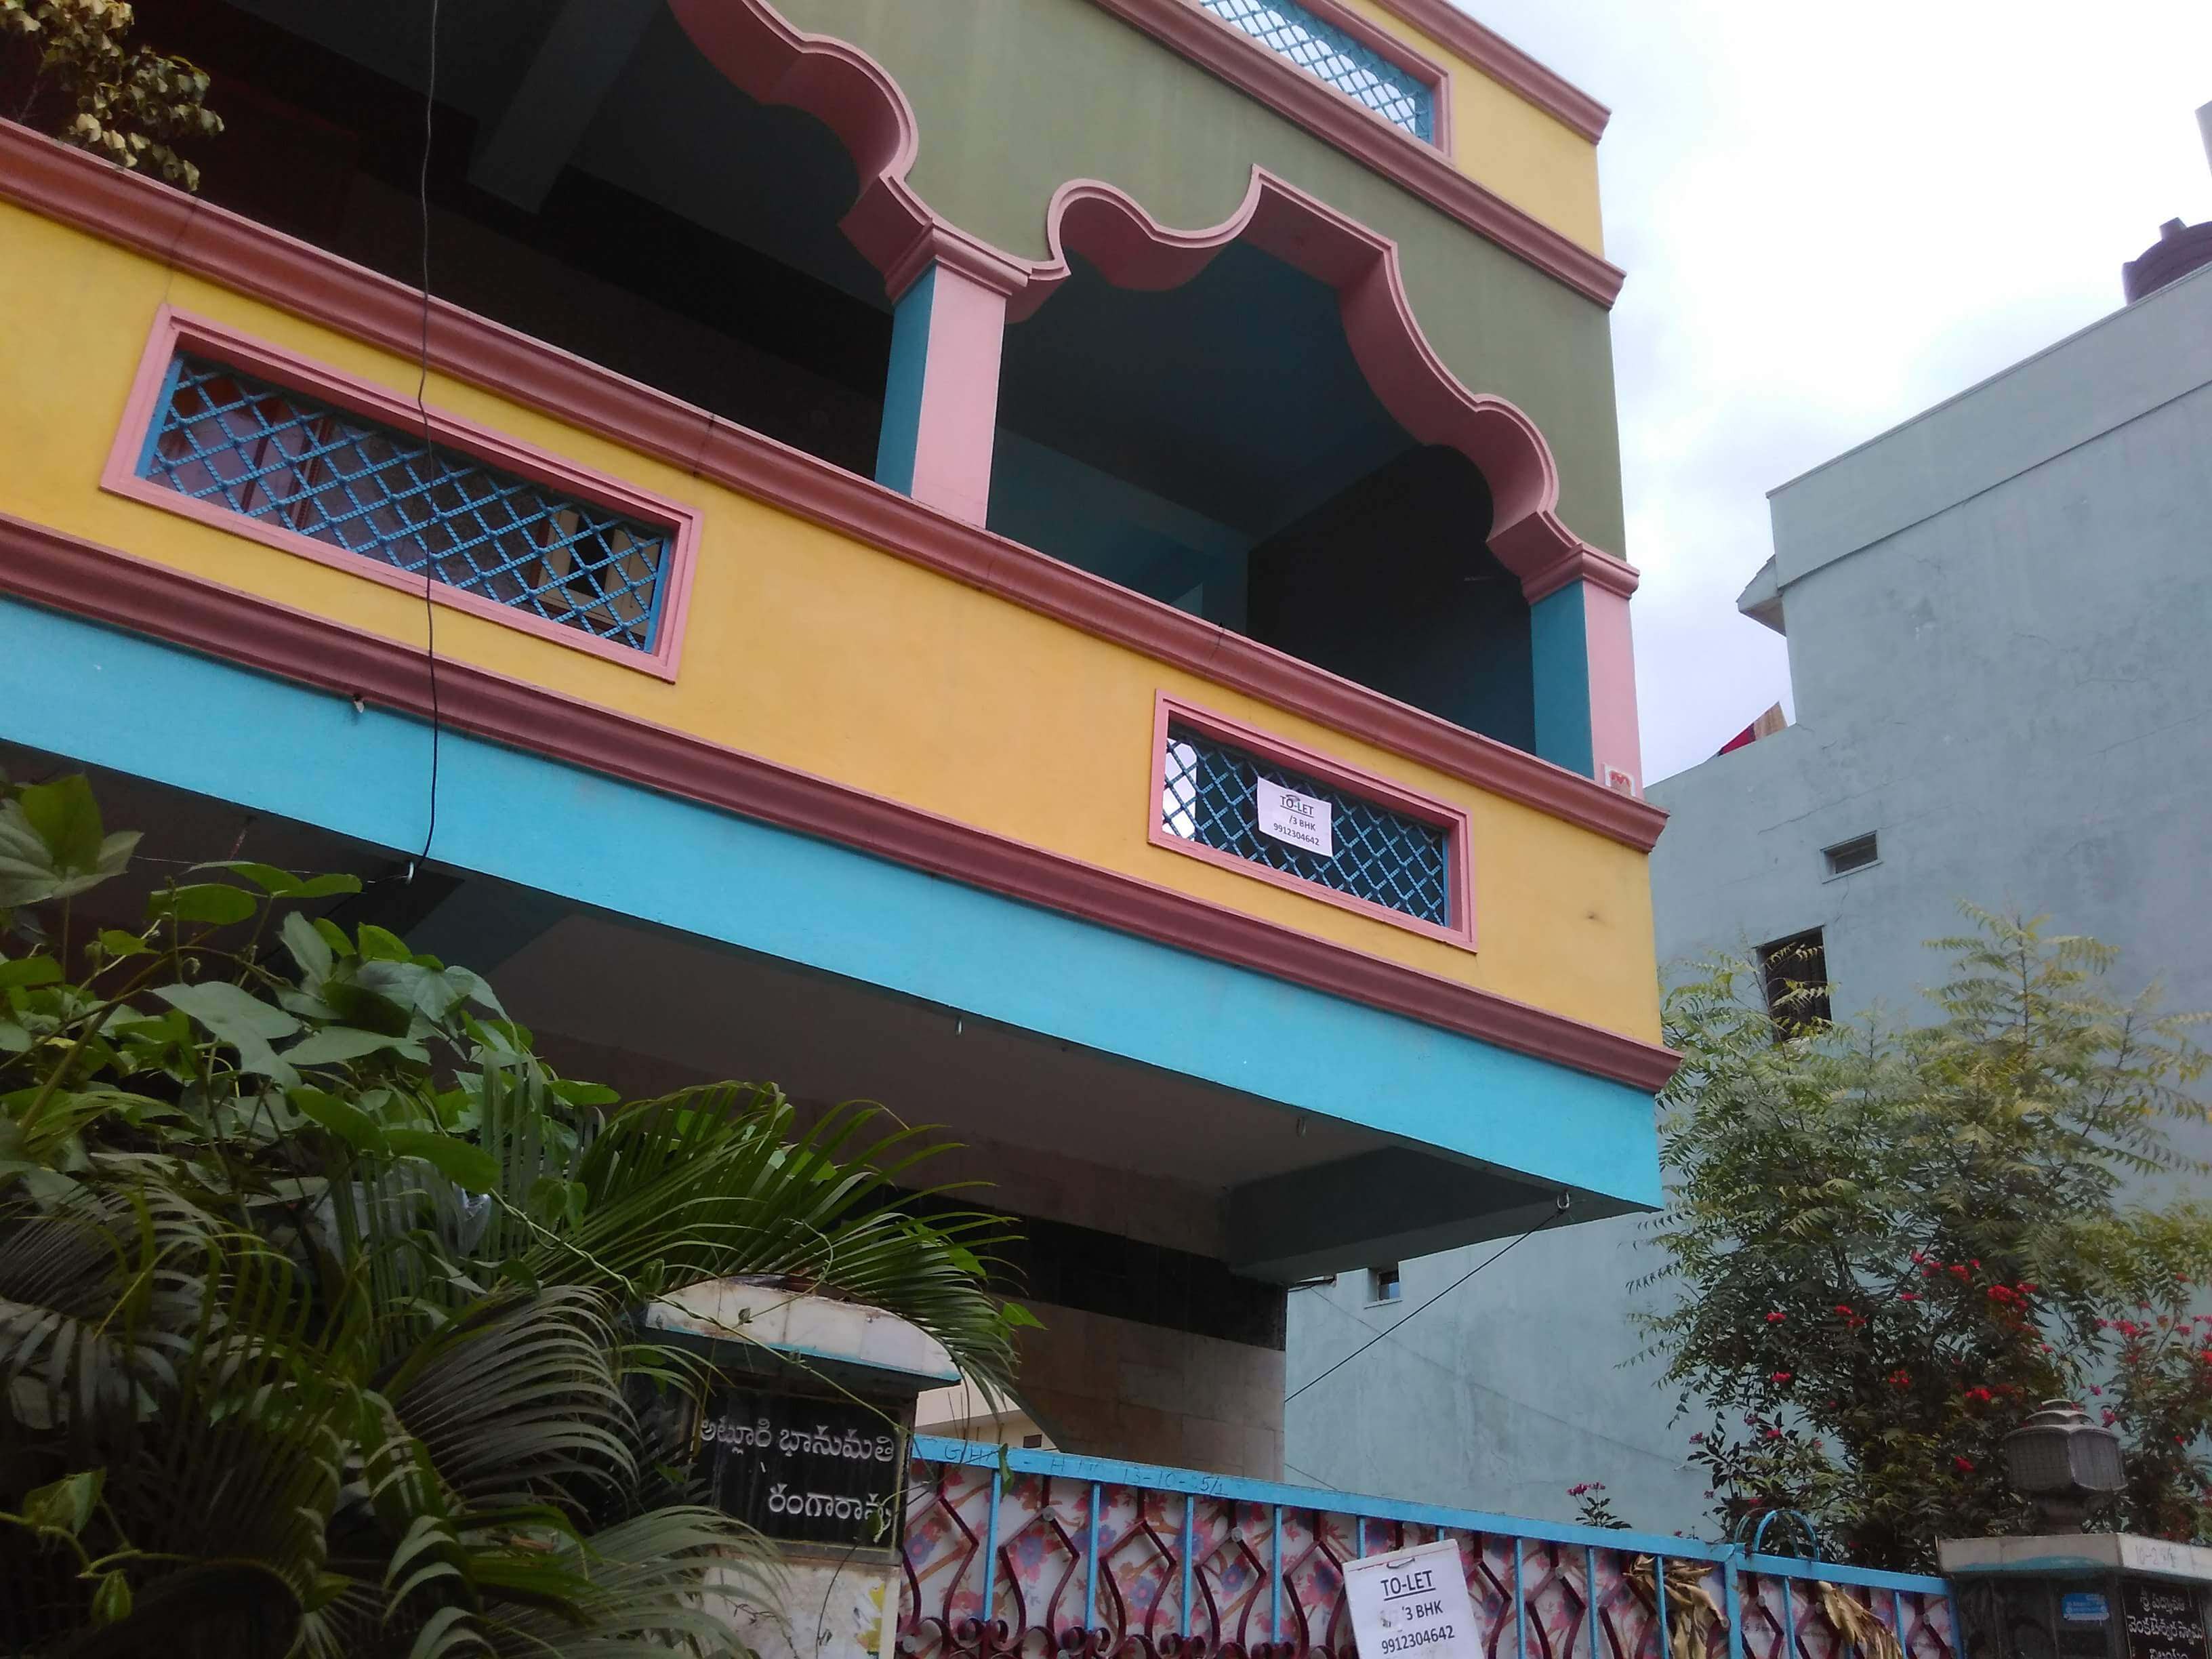 3BHK semi furnished house for Rent in P&T colony ,DilsukhNagar near Saibaba Temple,Metro Station ,More Super Market